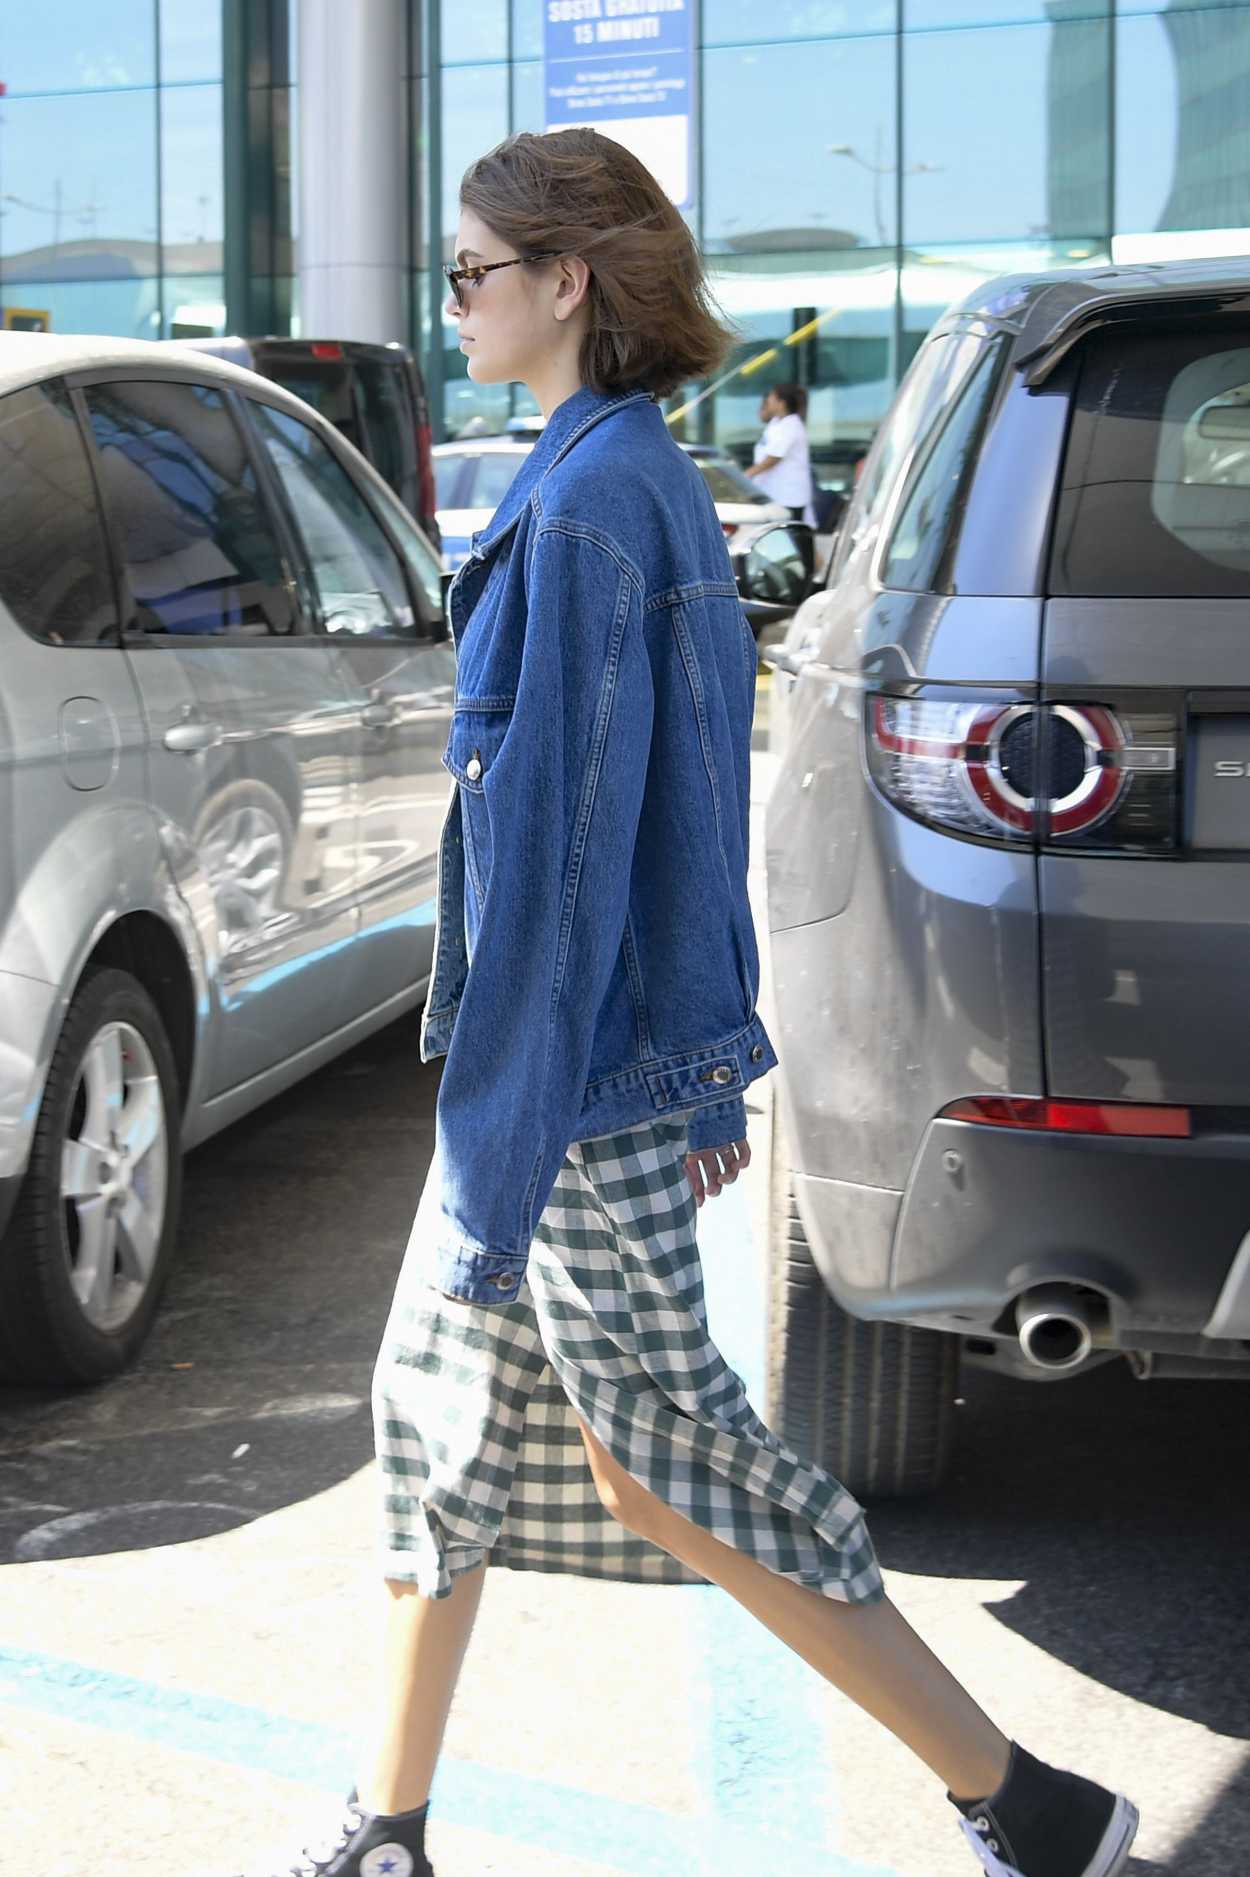 Kaia Gerber in a Blue Denim Jacket Arrives at Fiumicino Airport in Rome ...